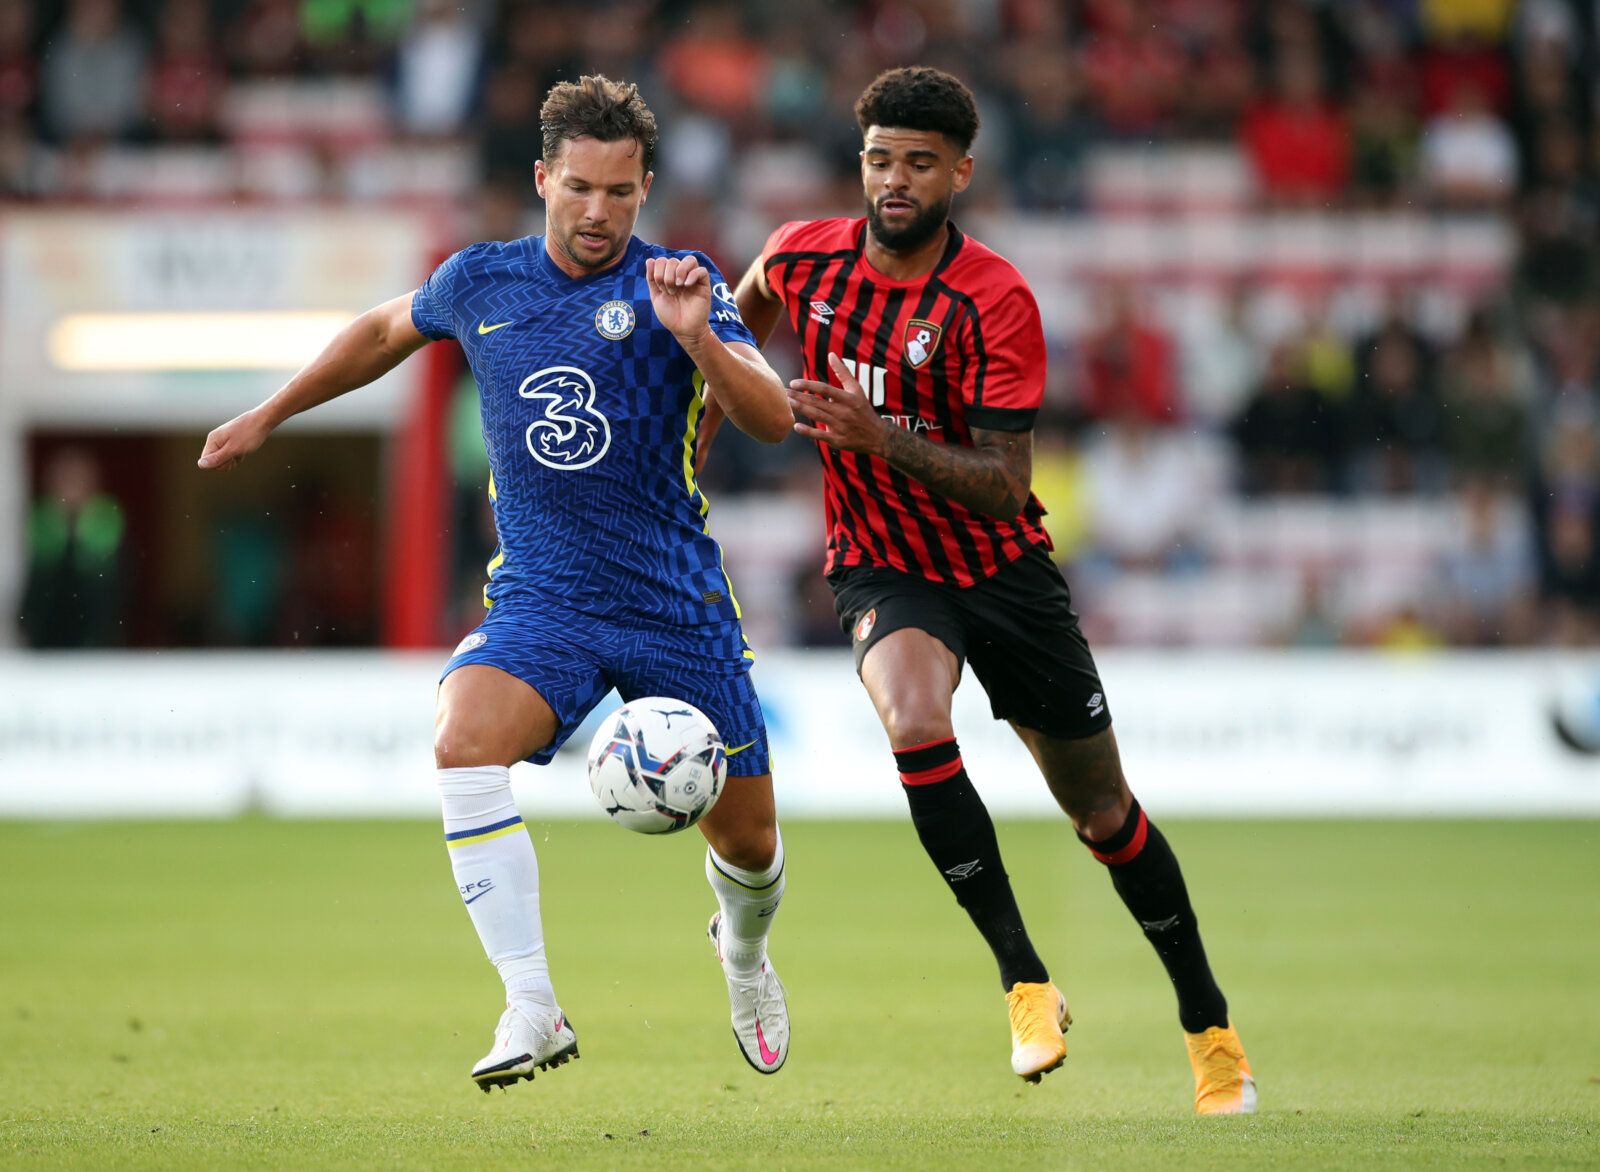 Soccer Football - Pre Season Friendly - AFC Bournemouth v Chelsea - Vitality Stadium, Bournemouth, Britain - July 27, 2021 Chelsea's Danny Drinkwater in action with Bournemouth's Philip Billing Action Images via Reuters/Peter Cziborra